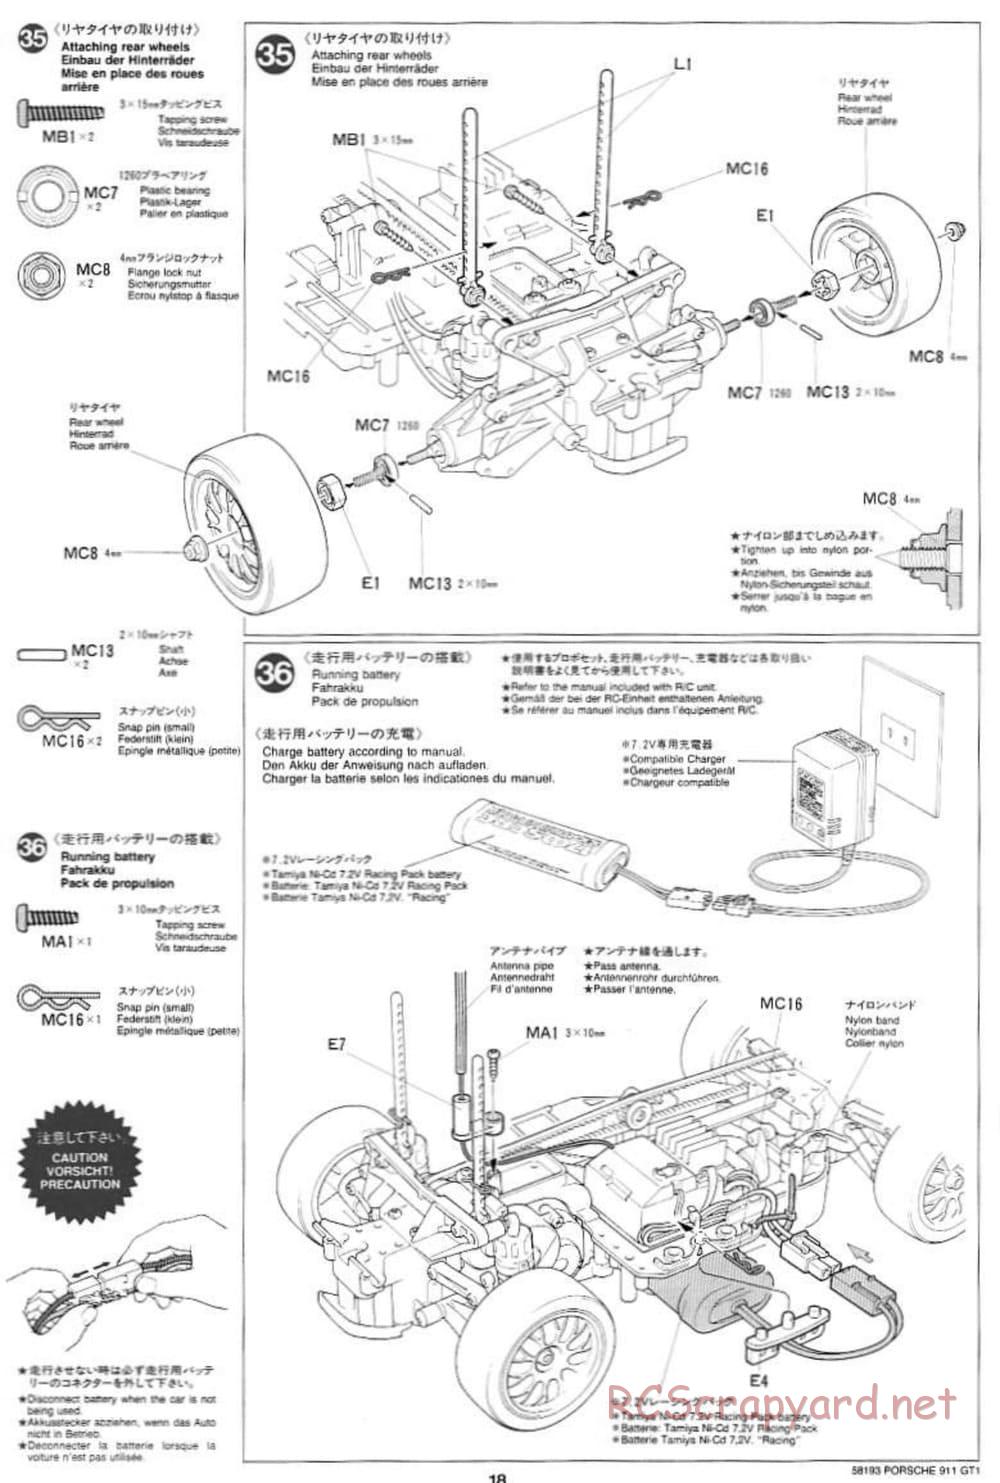 Tamiya - Porsche 911 GT1 - TA-03RS Chassis - Manual - Page 18